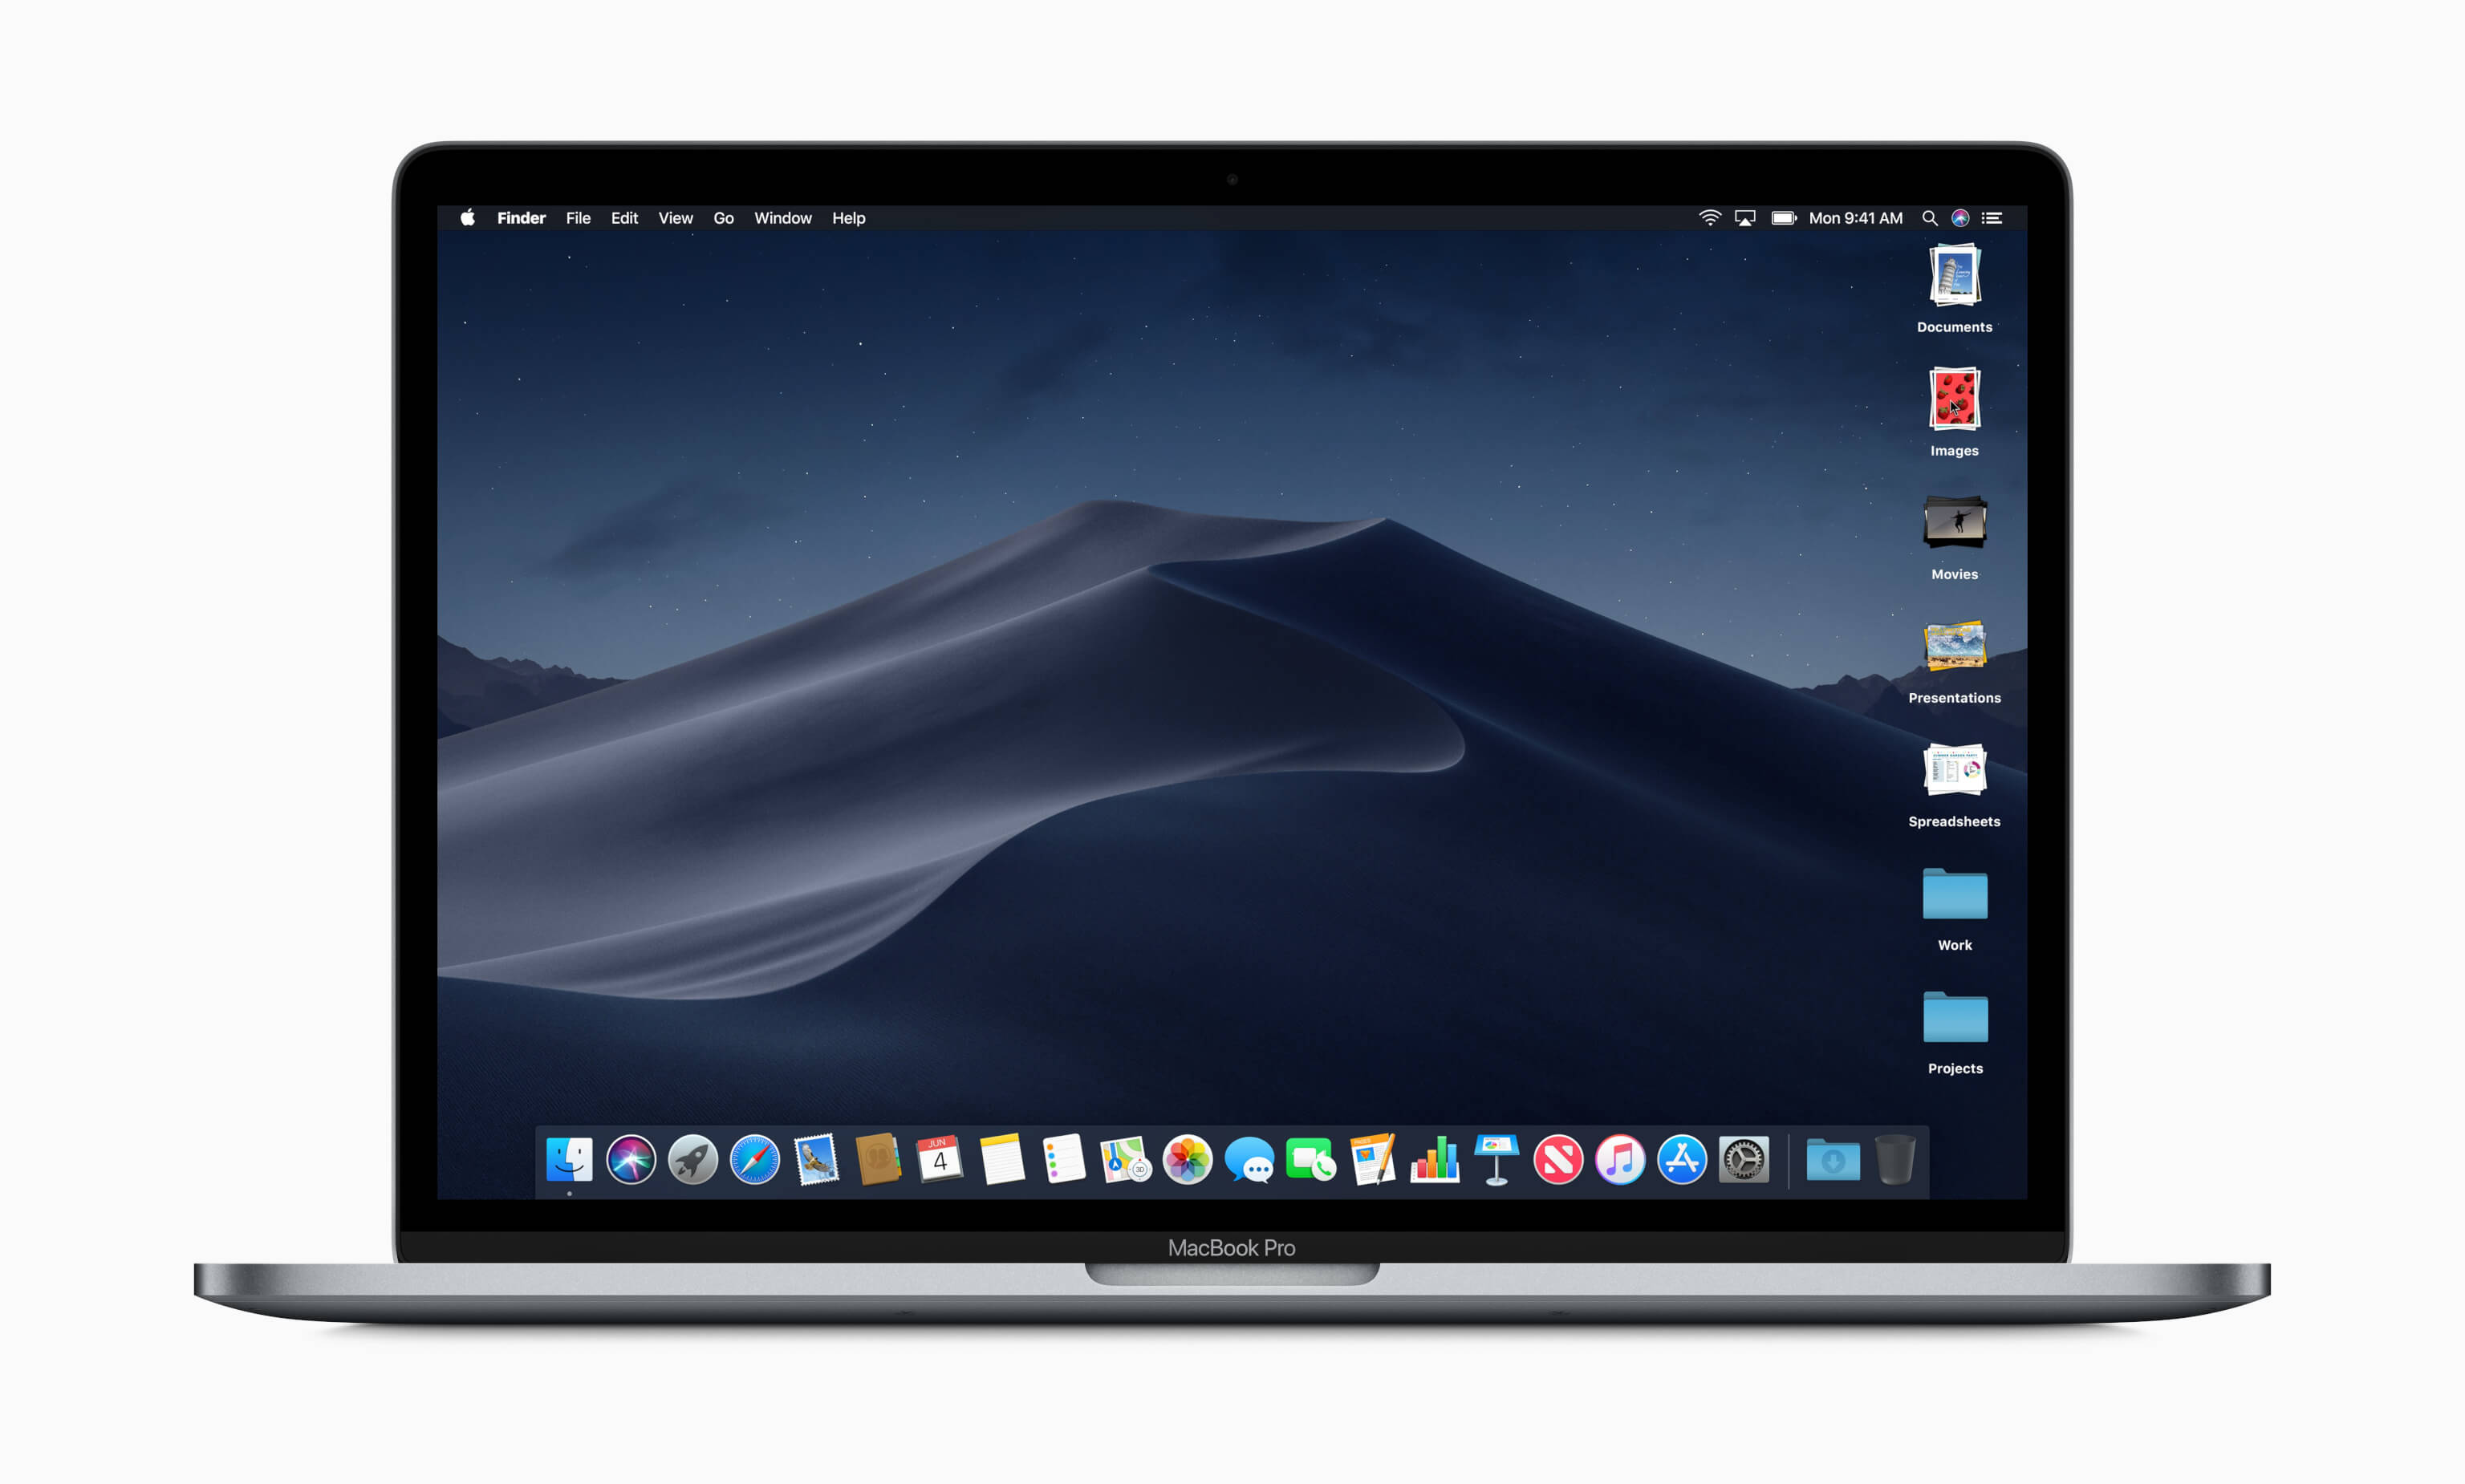 Download Macos Mojave From App Store